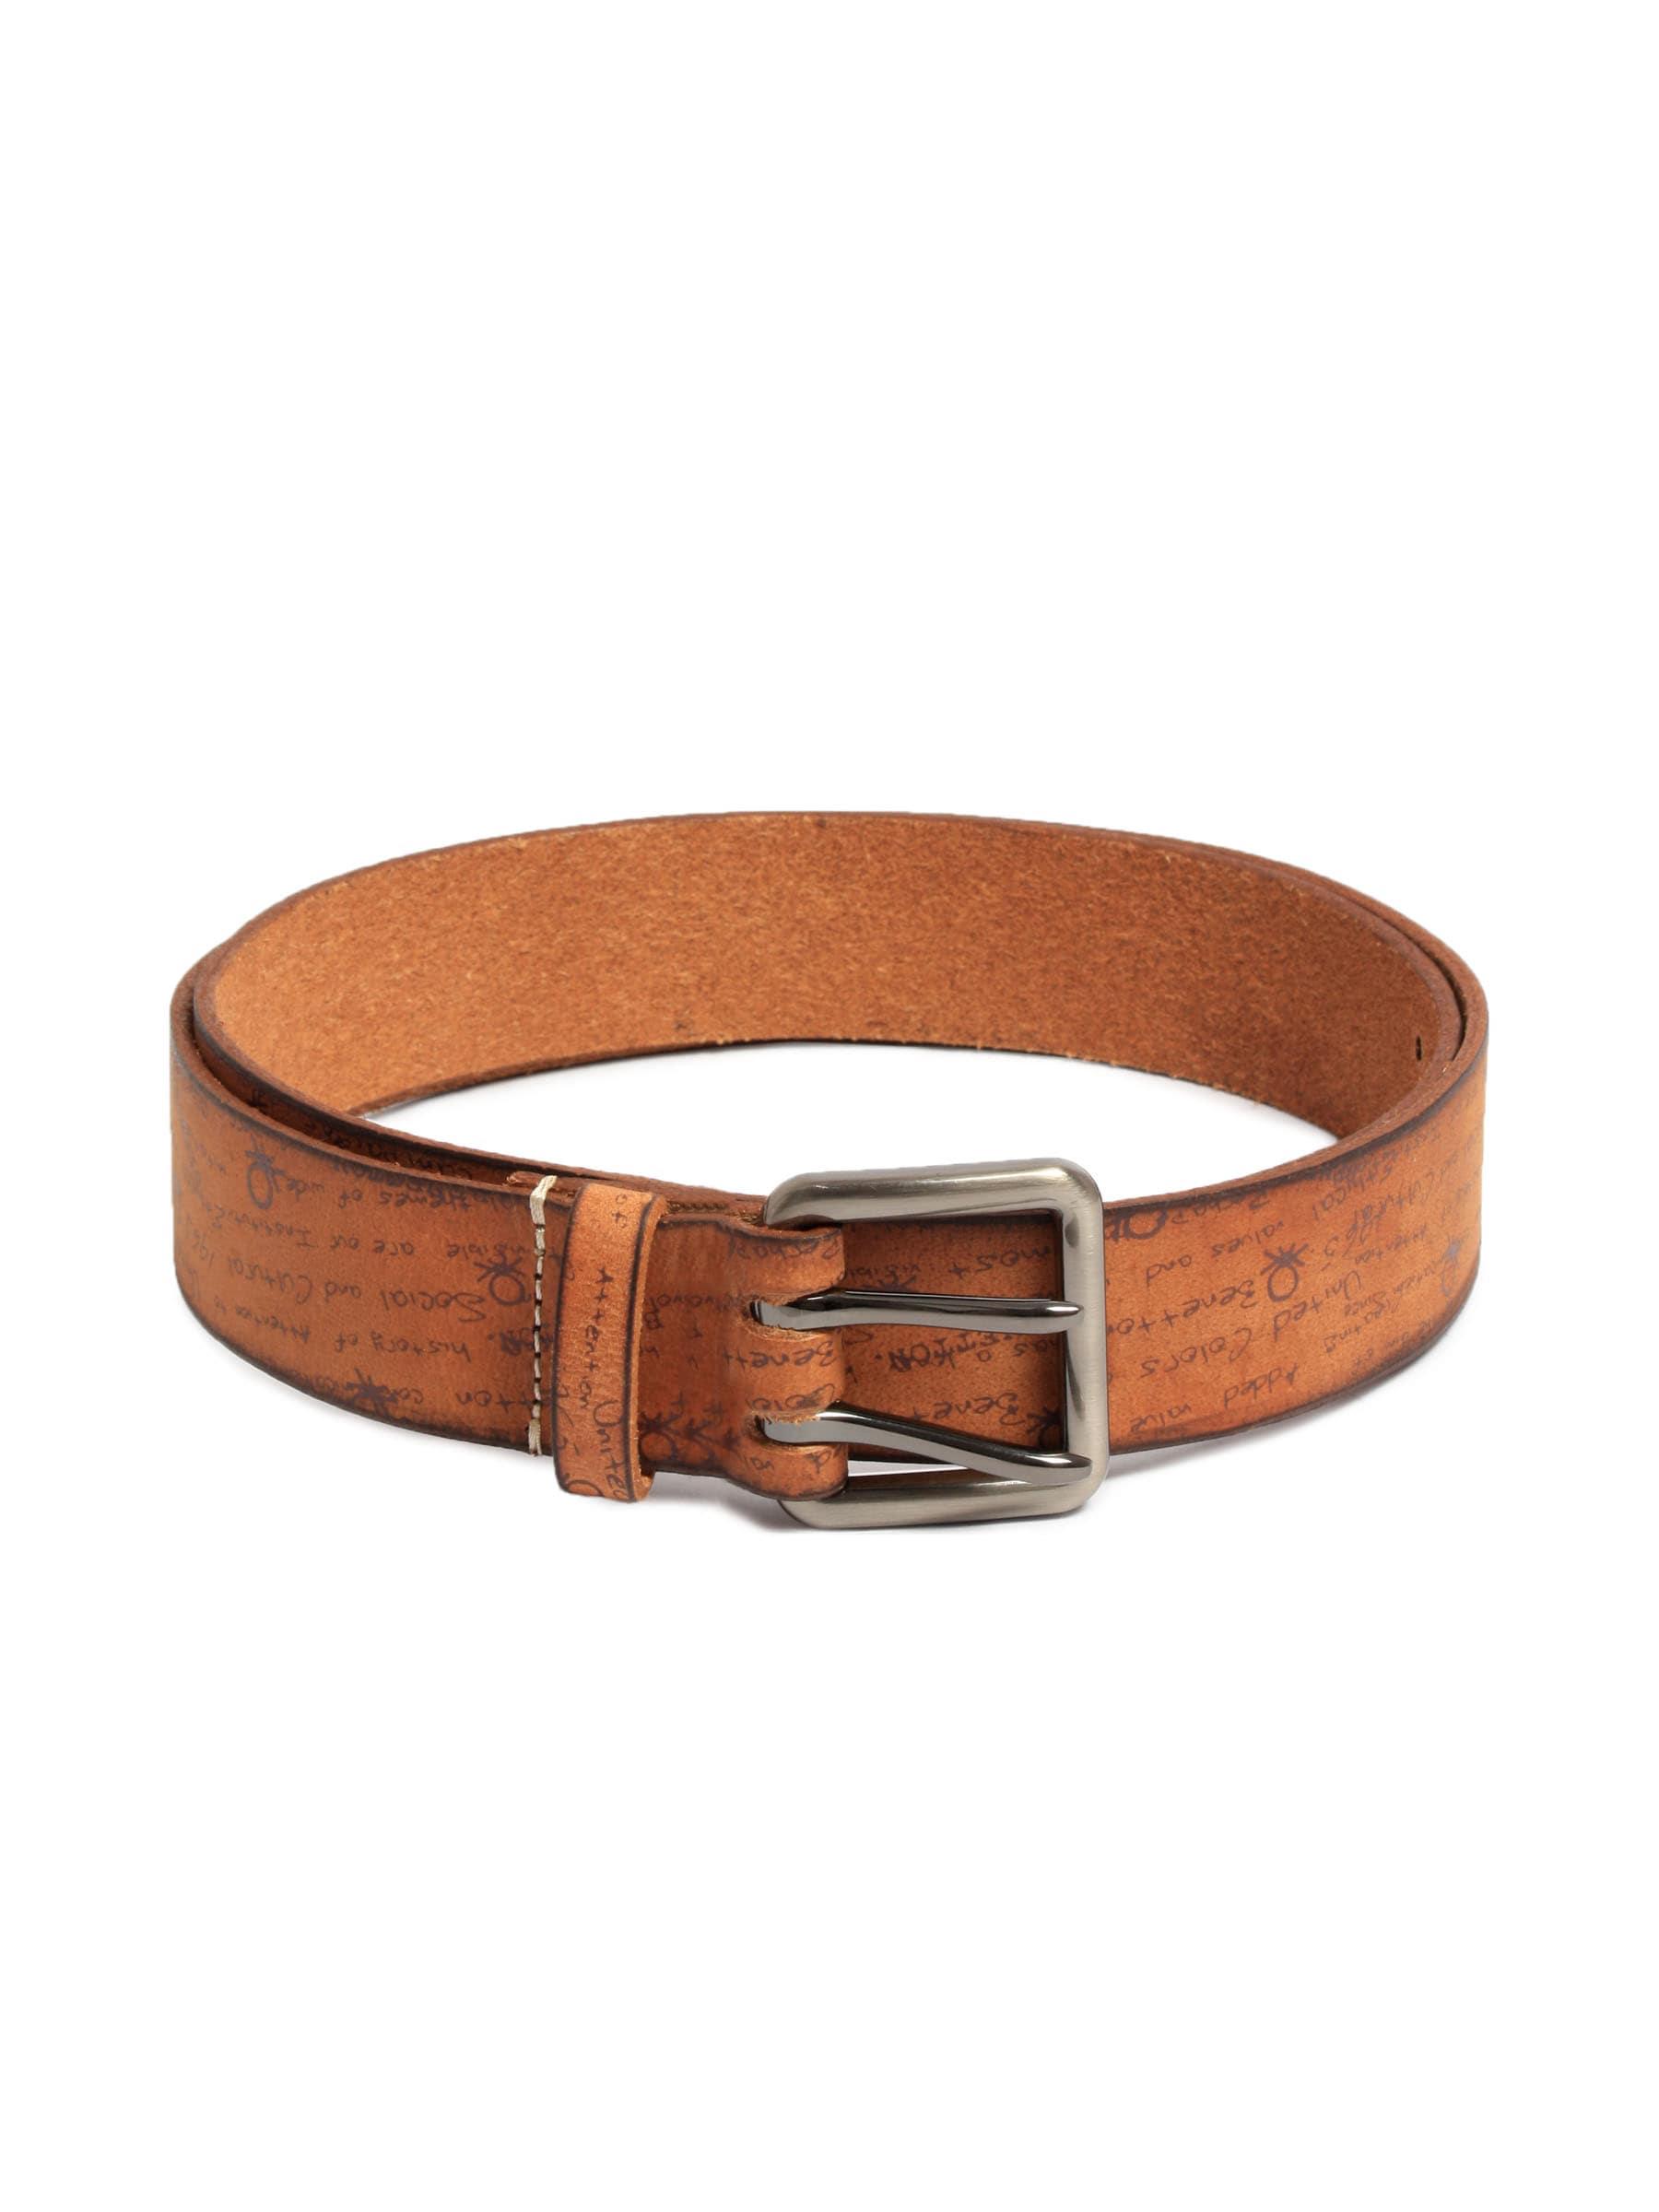 United Colors of Benetton Men Printed Brown Belts